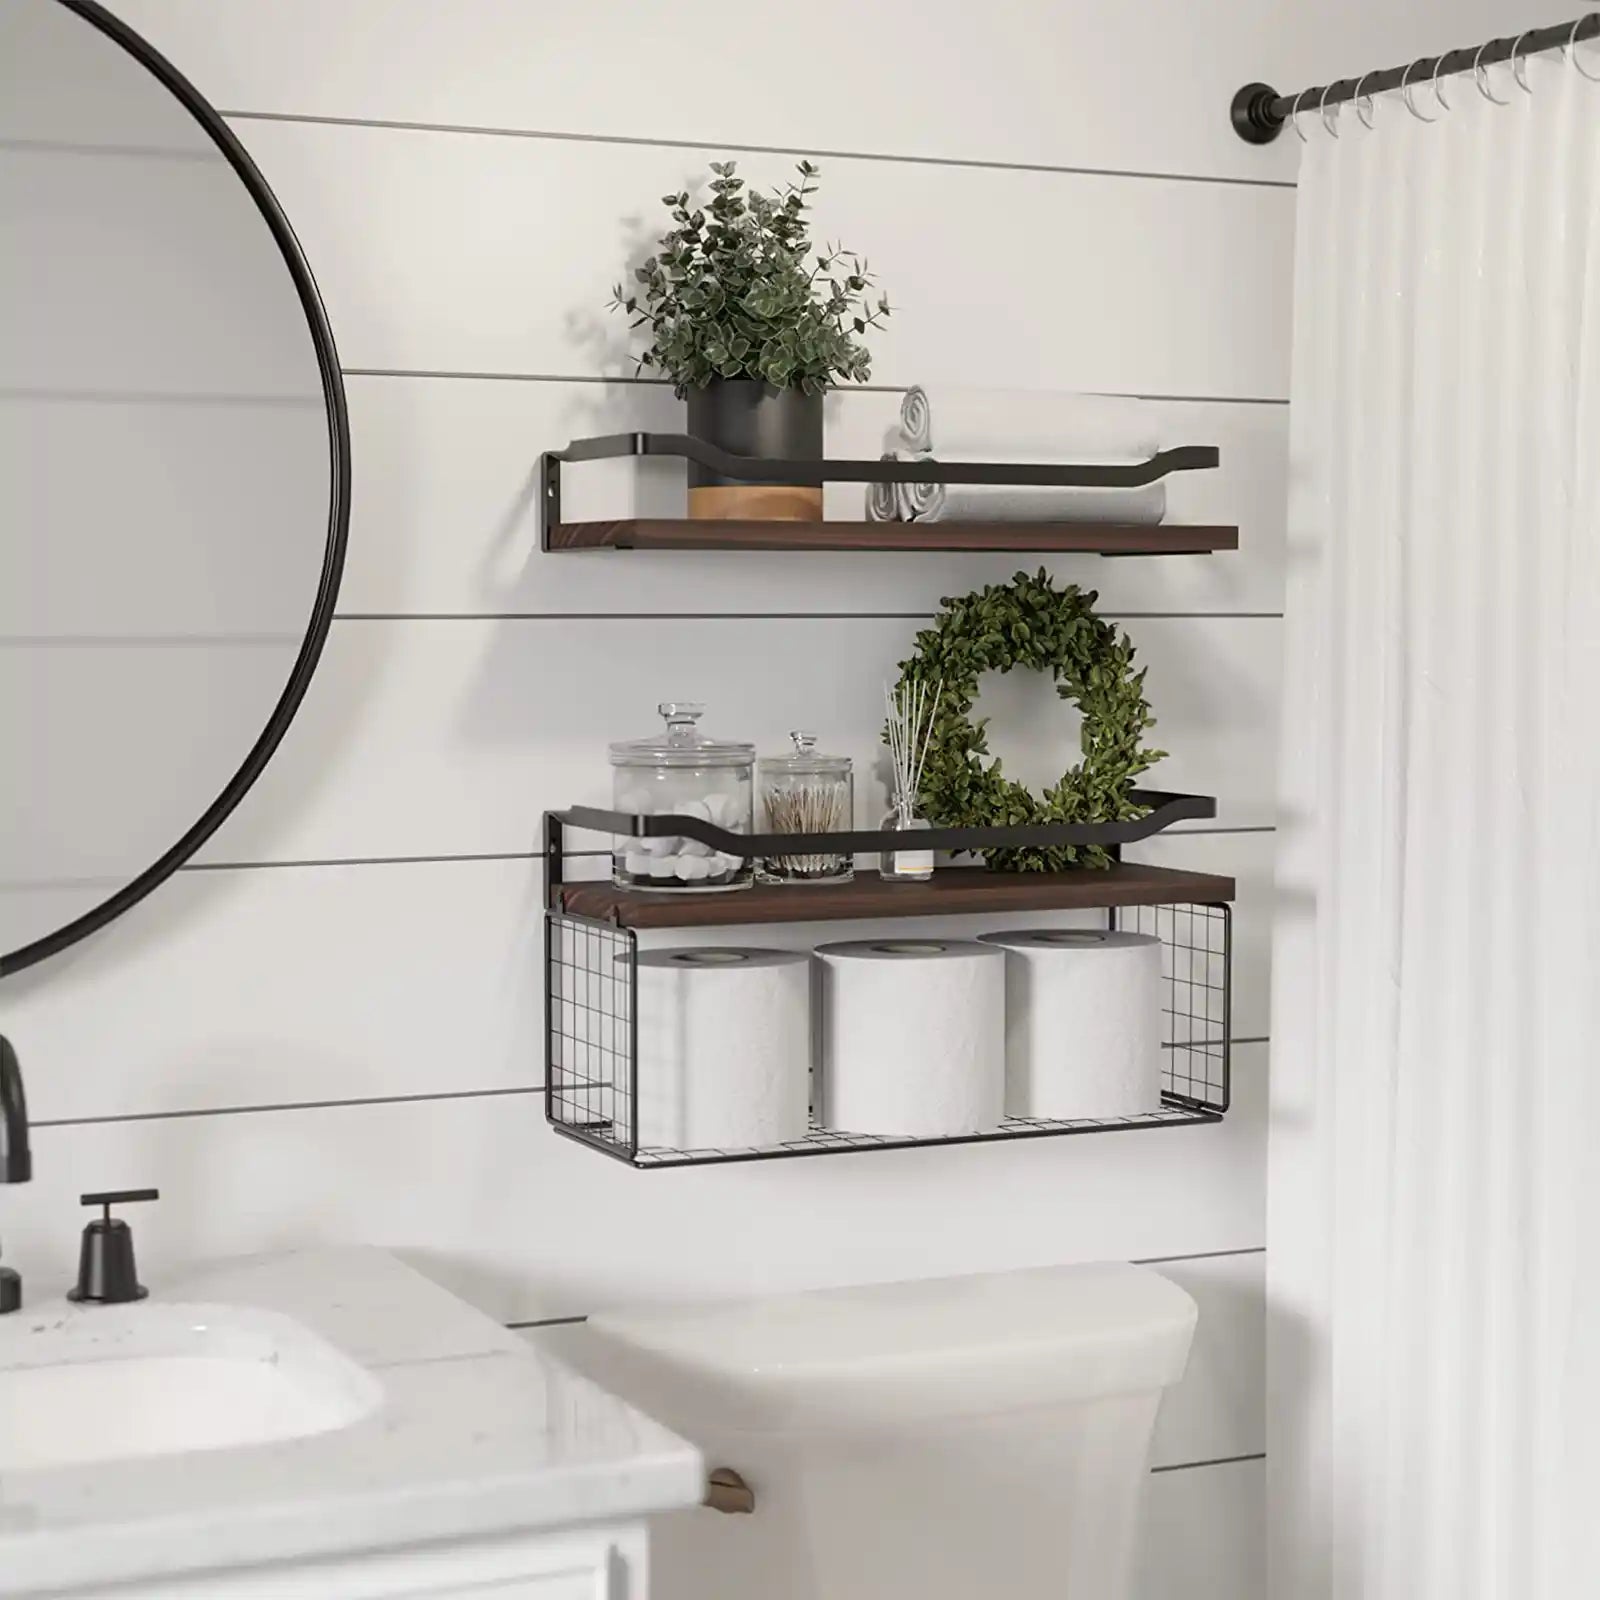 Floating Shelves with Wire Storage Basket, Bathroom Shelves Over Toilet with Protective Metal Guardrail, Wood Wall Shelves for Bathroom, Bedroom, Living Room, Toilet Paper